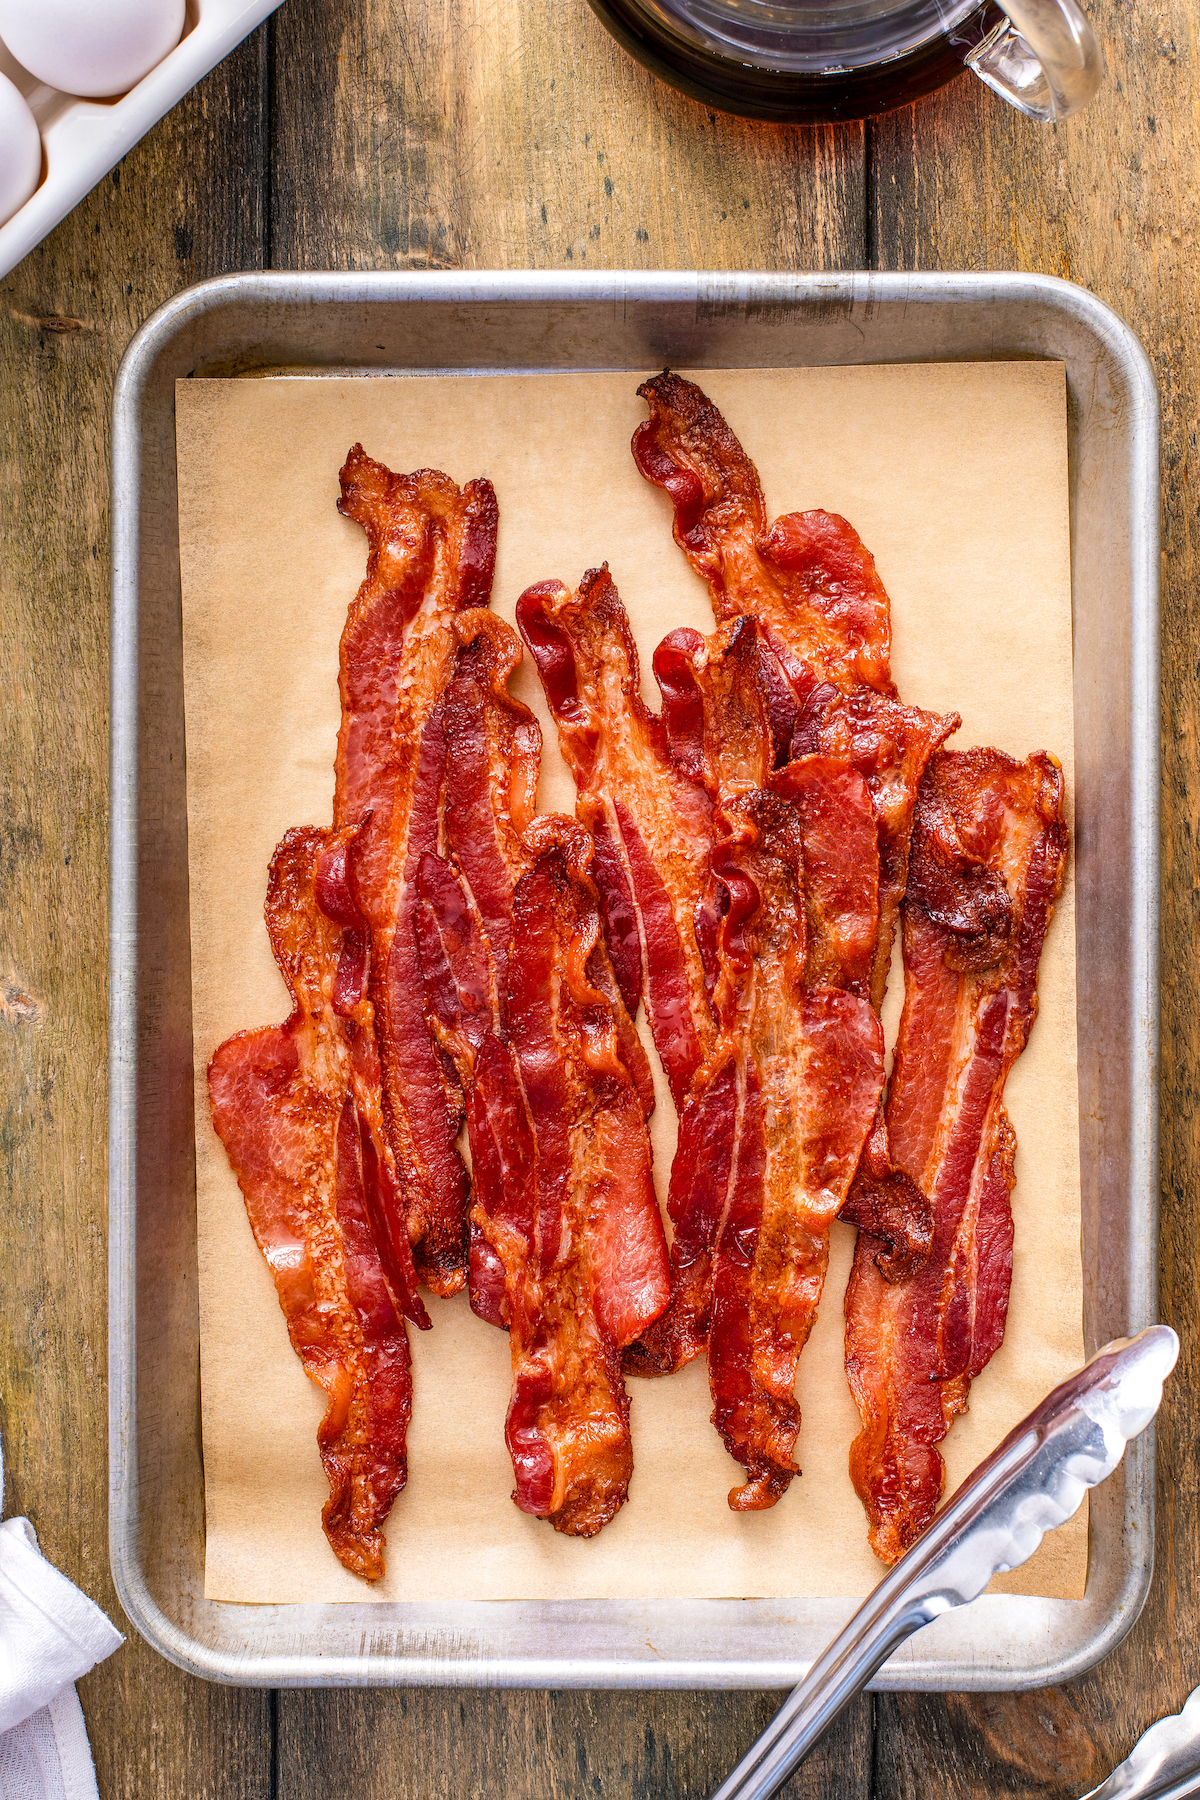 Crispy cooked bacon in oven after draining on paper towels. Bacon is arranged on top of a parchment paper lined baking sheet with tongs.